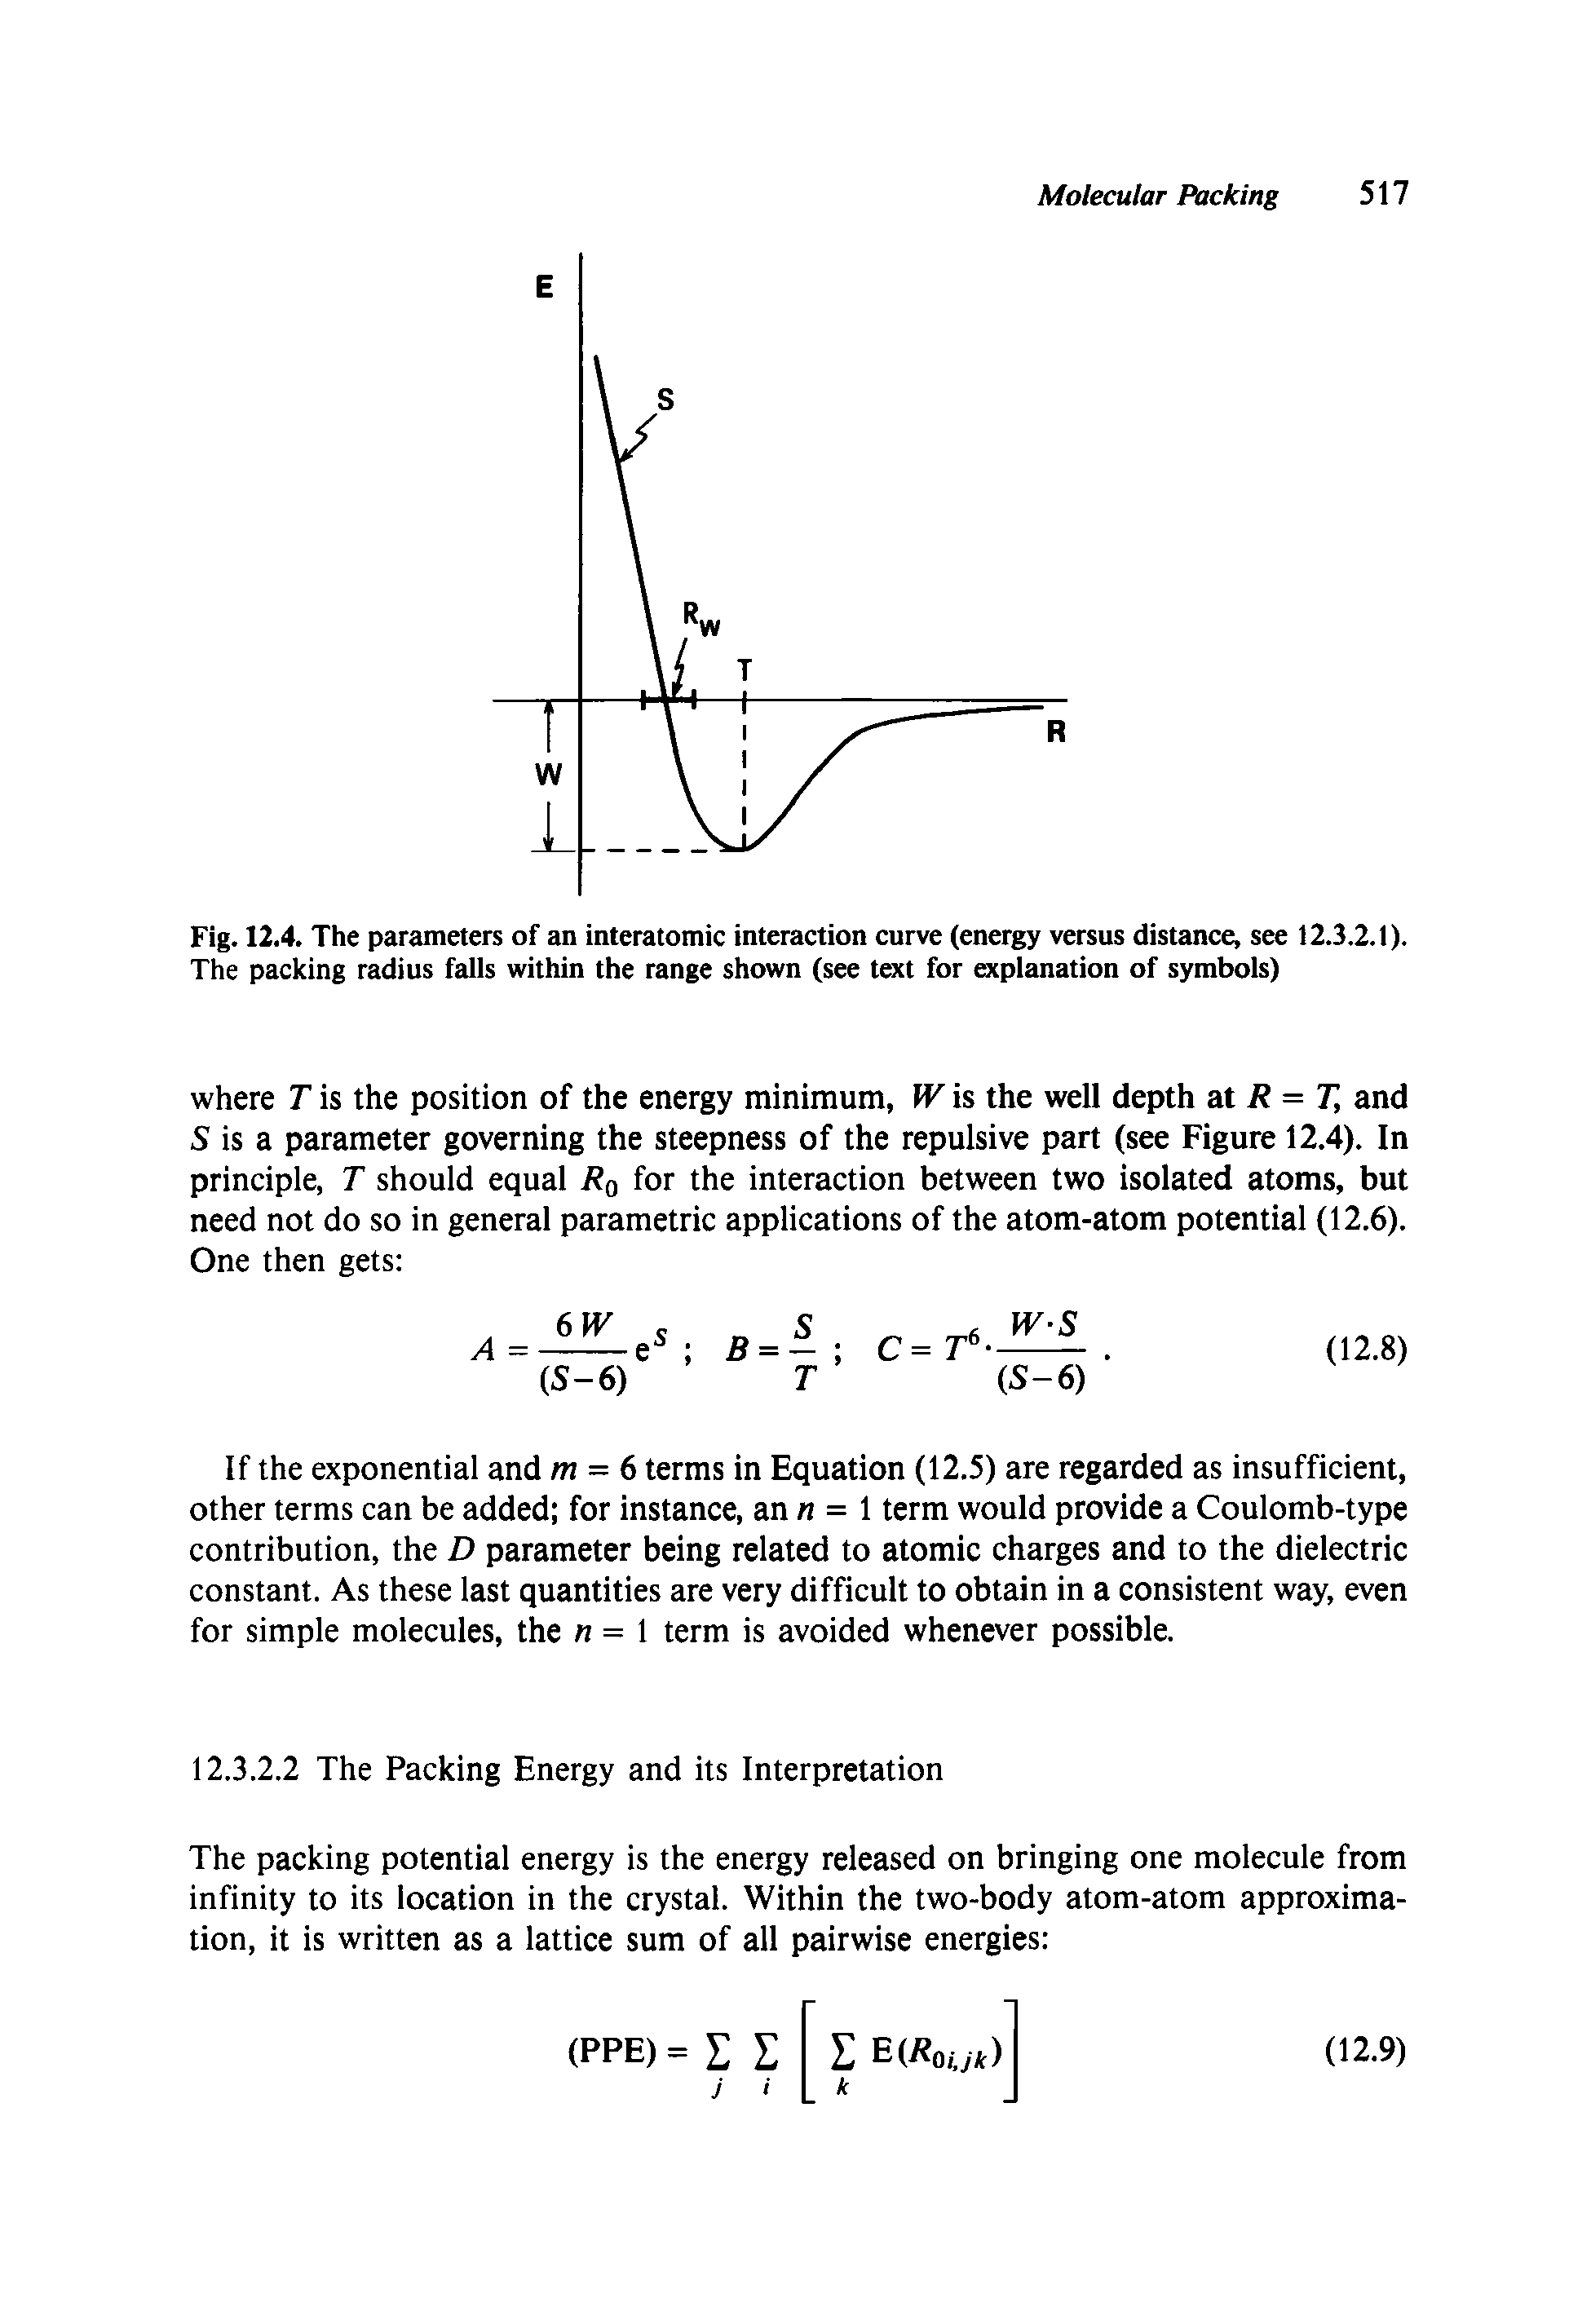 Fig. 12.4. The parameters of an interatomic interaction curve (energy versus distance, see 12.3.2.1). The packing radius falls within the range shown (see text for explanation of symbols)...